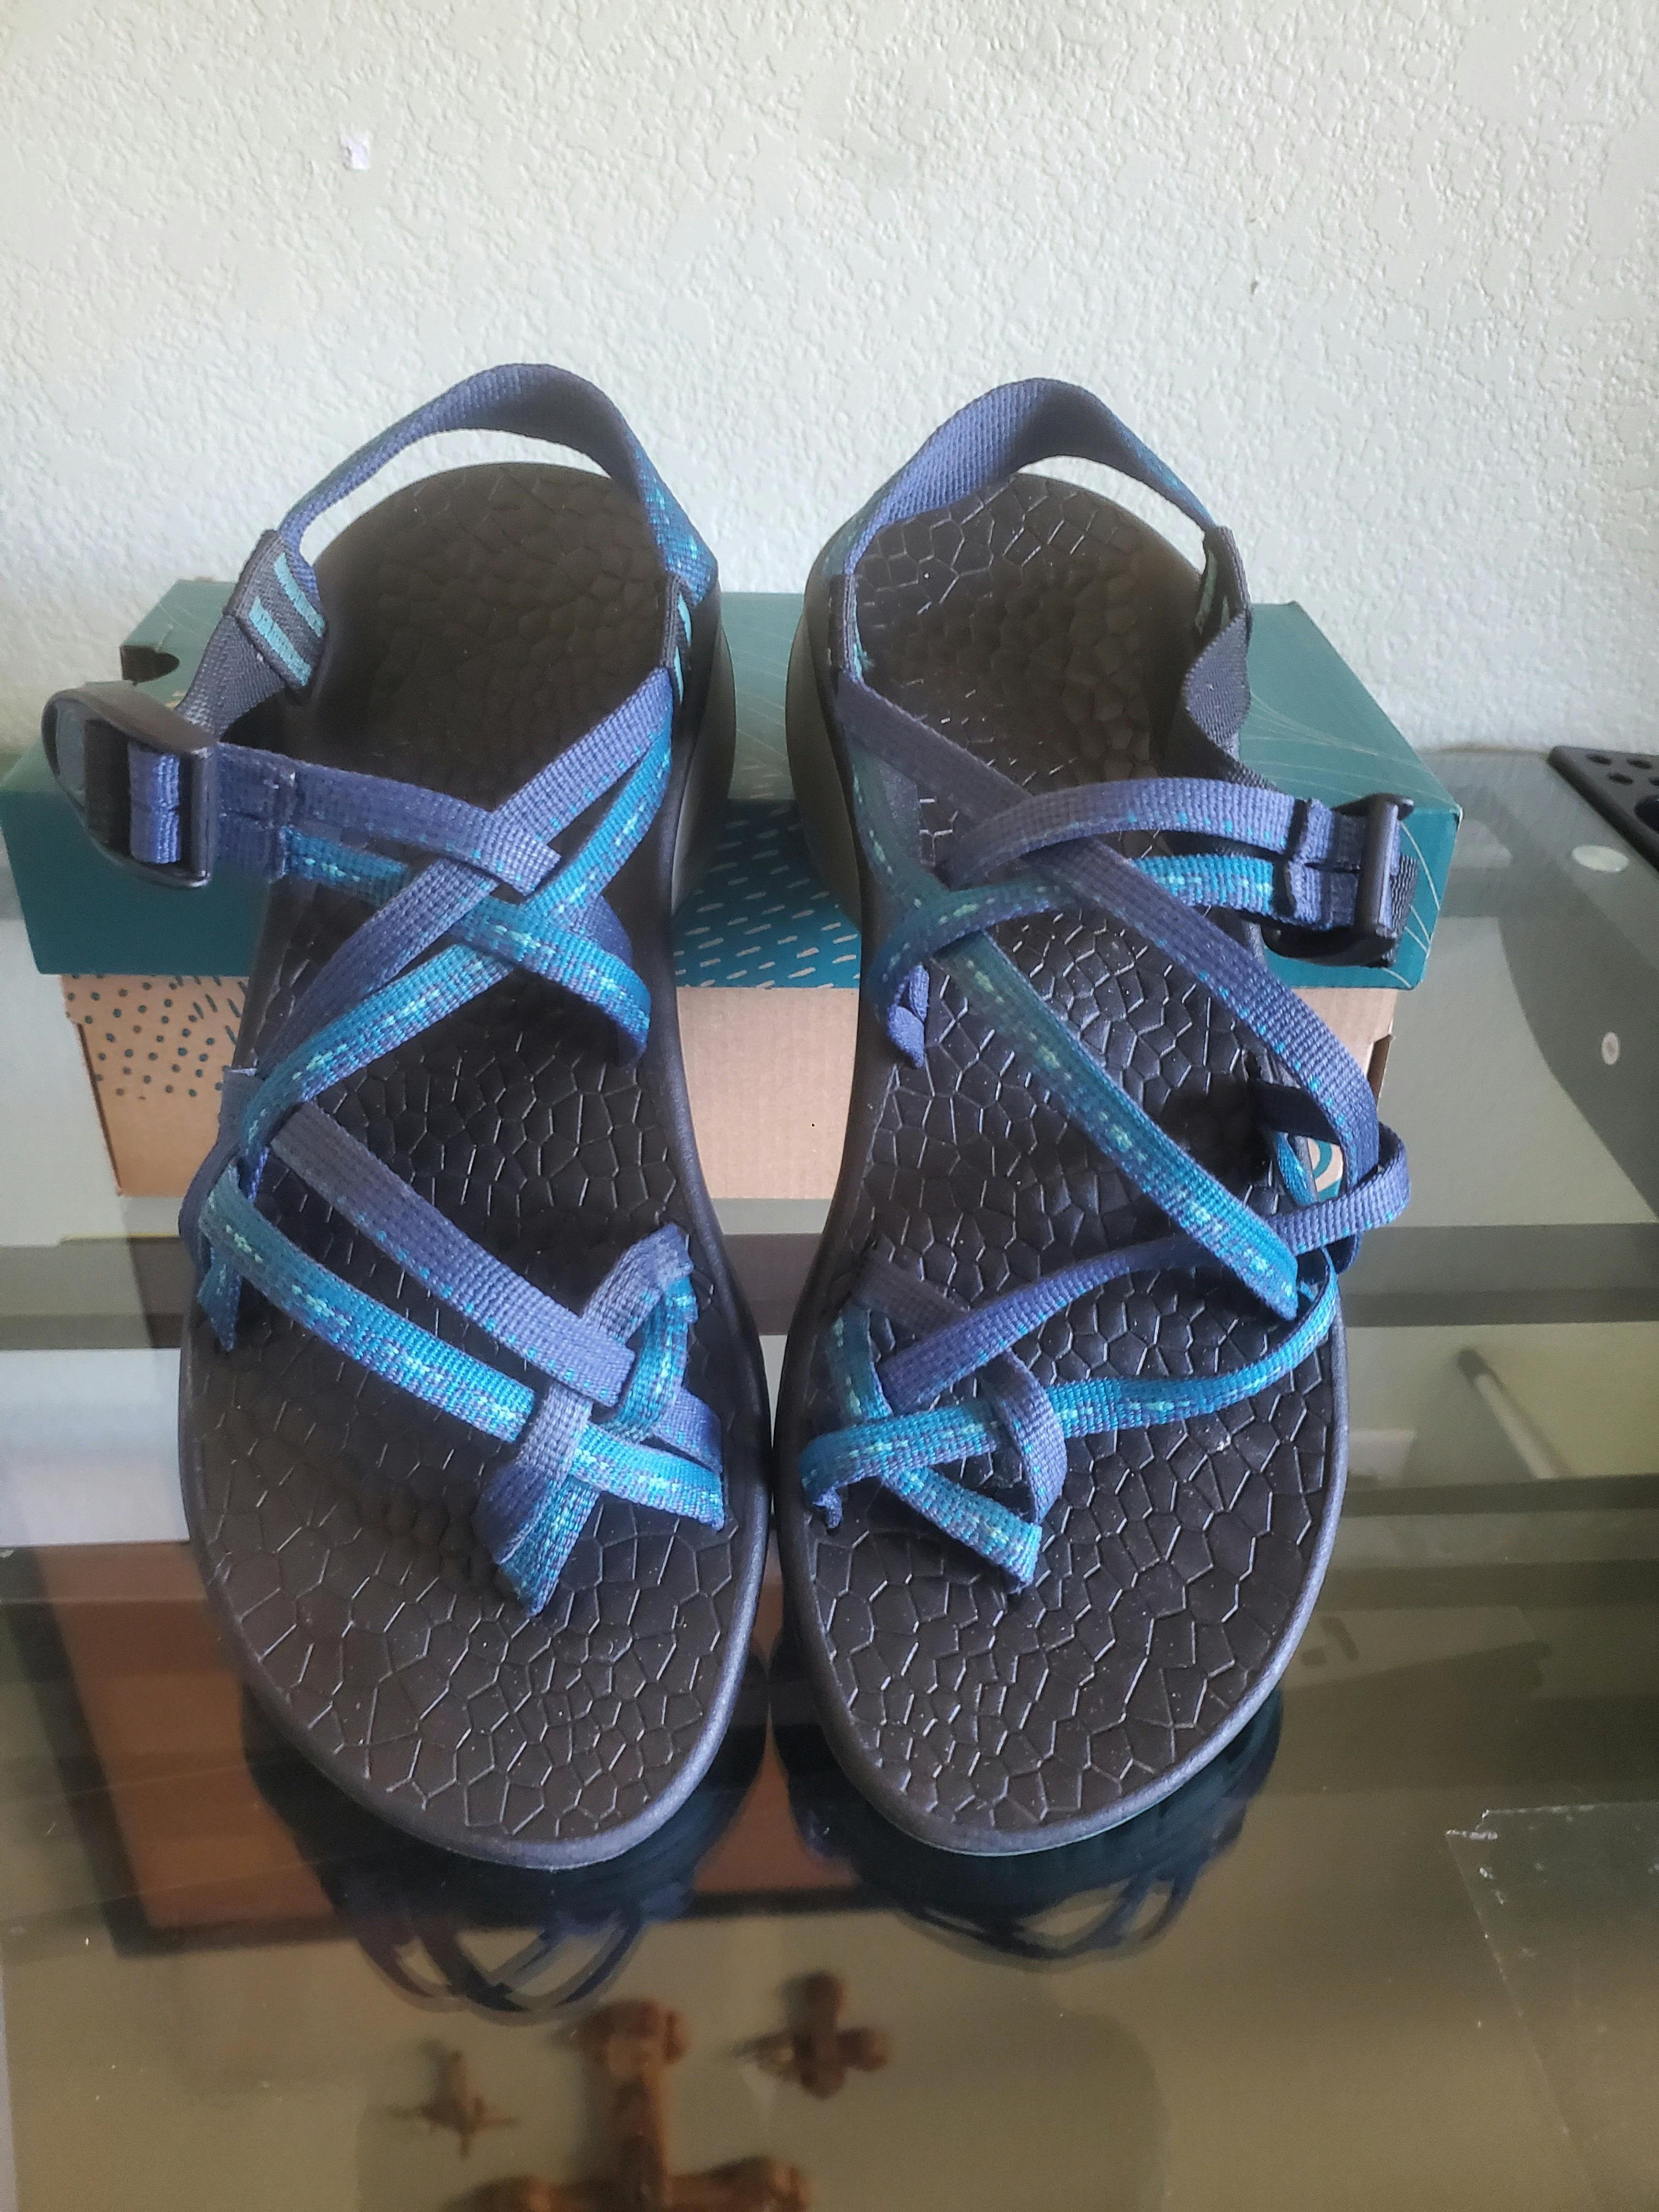  Chaco Z Volv X2 Sandals  - Womens 9